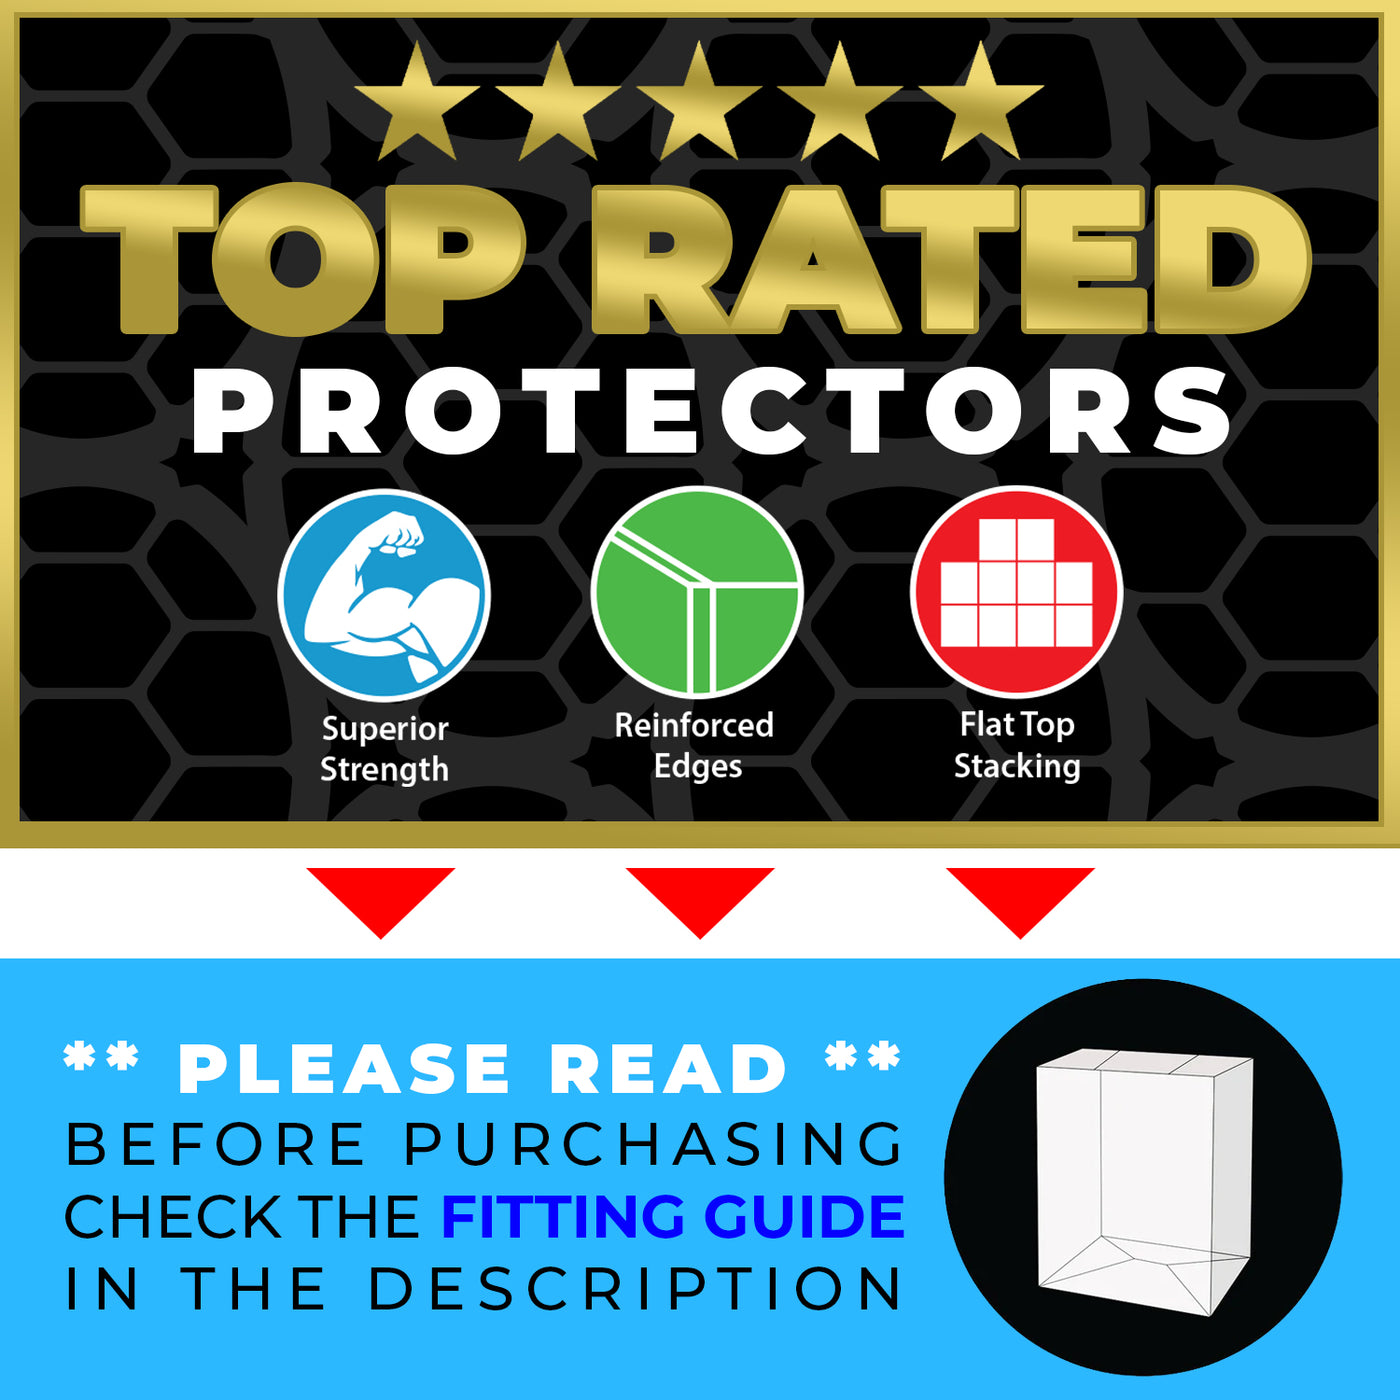 2 pack best funko pop protectors thick strong uv scratch flat top stack vinyl display geek plastic shield vaulted eco armor fits collect protect display case kollector protector